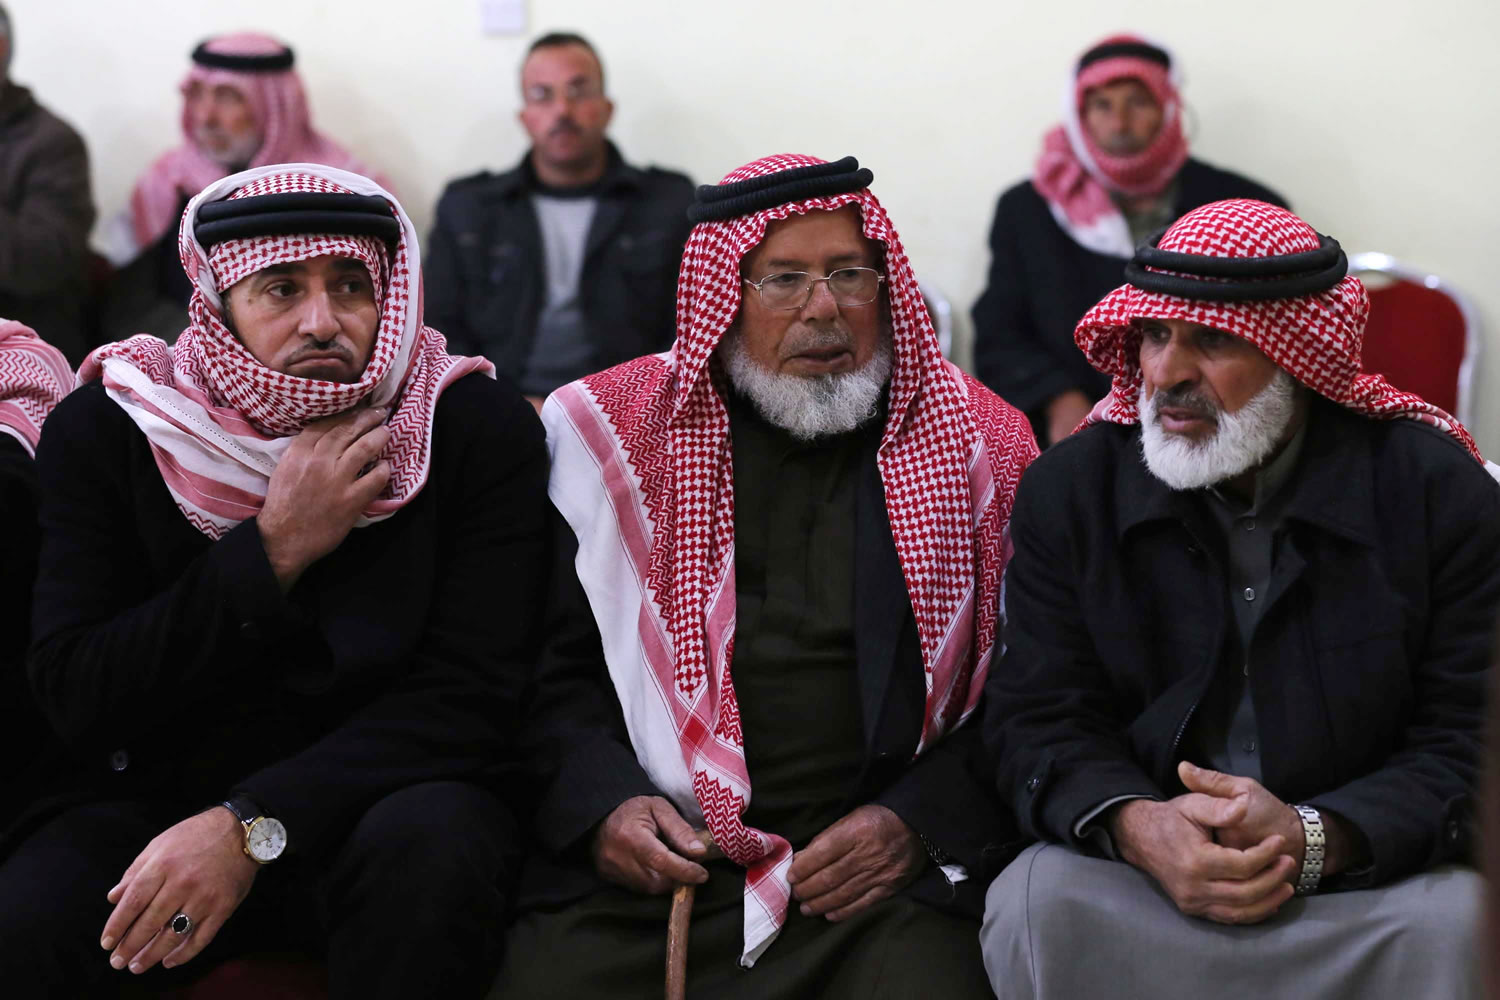 Friends and relatives of Mu'ath Safi al-Kaseasbeh, a Jordanian pilot captured by the Islamic State group, gather in the town of Aey near Al Karak in southern Jordan on Wednesday.